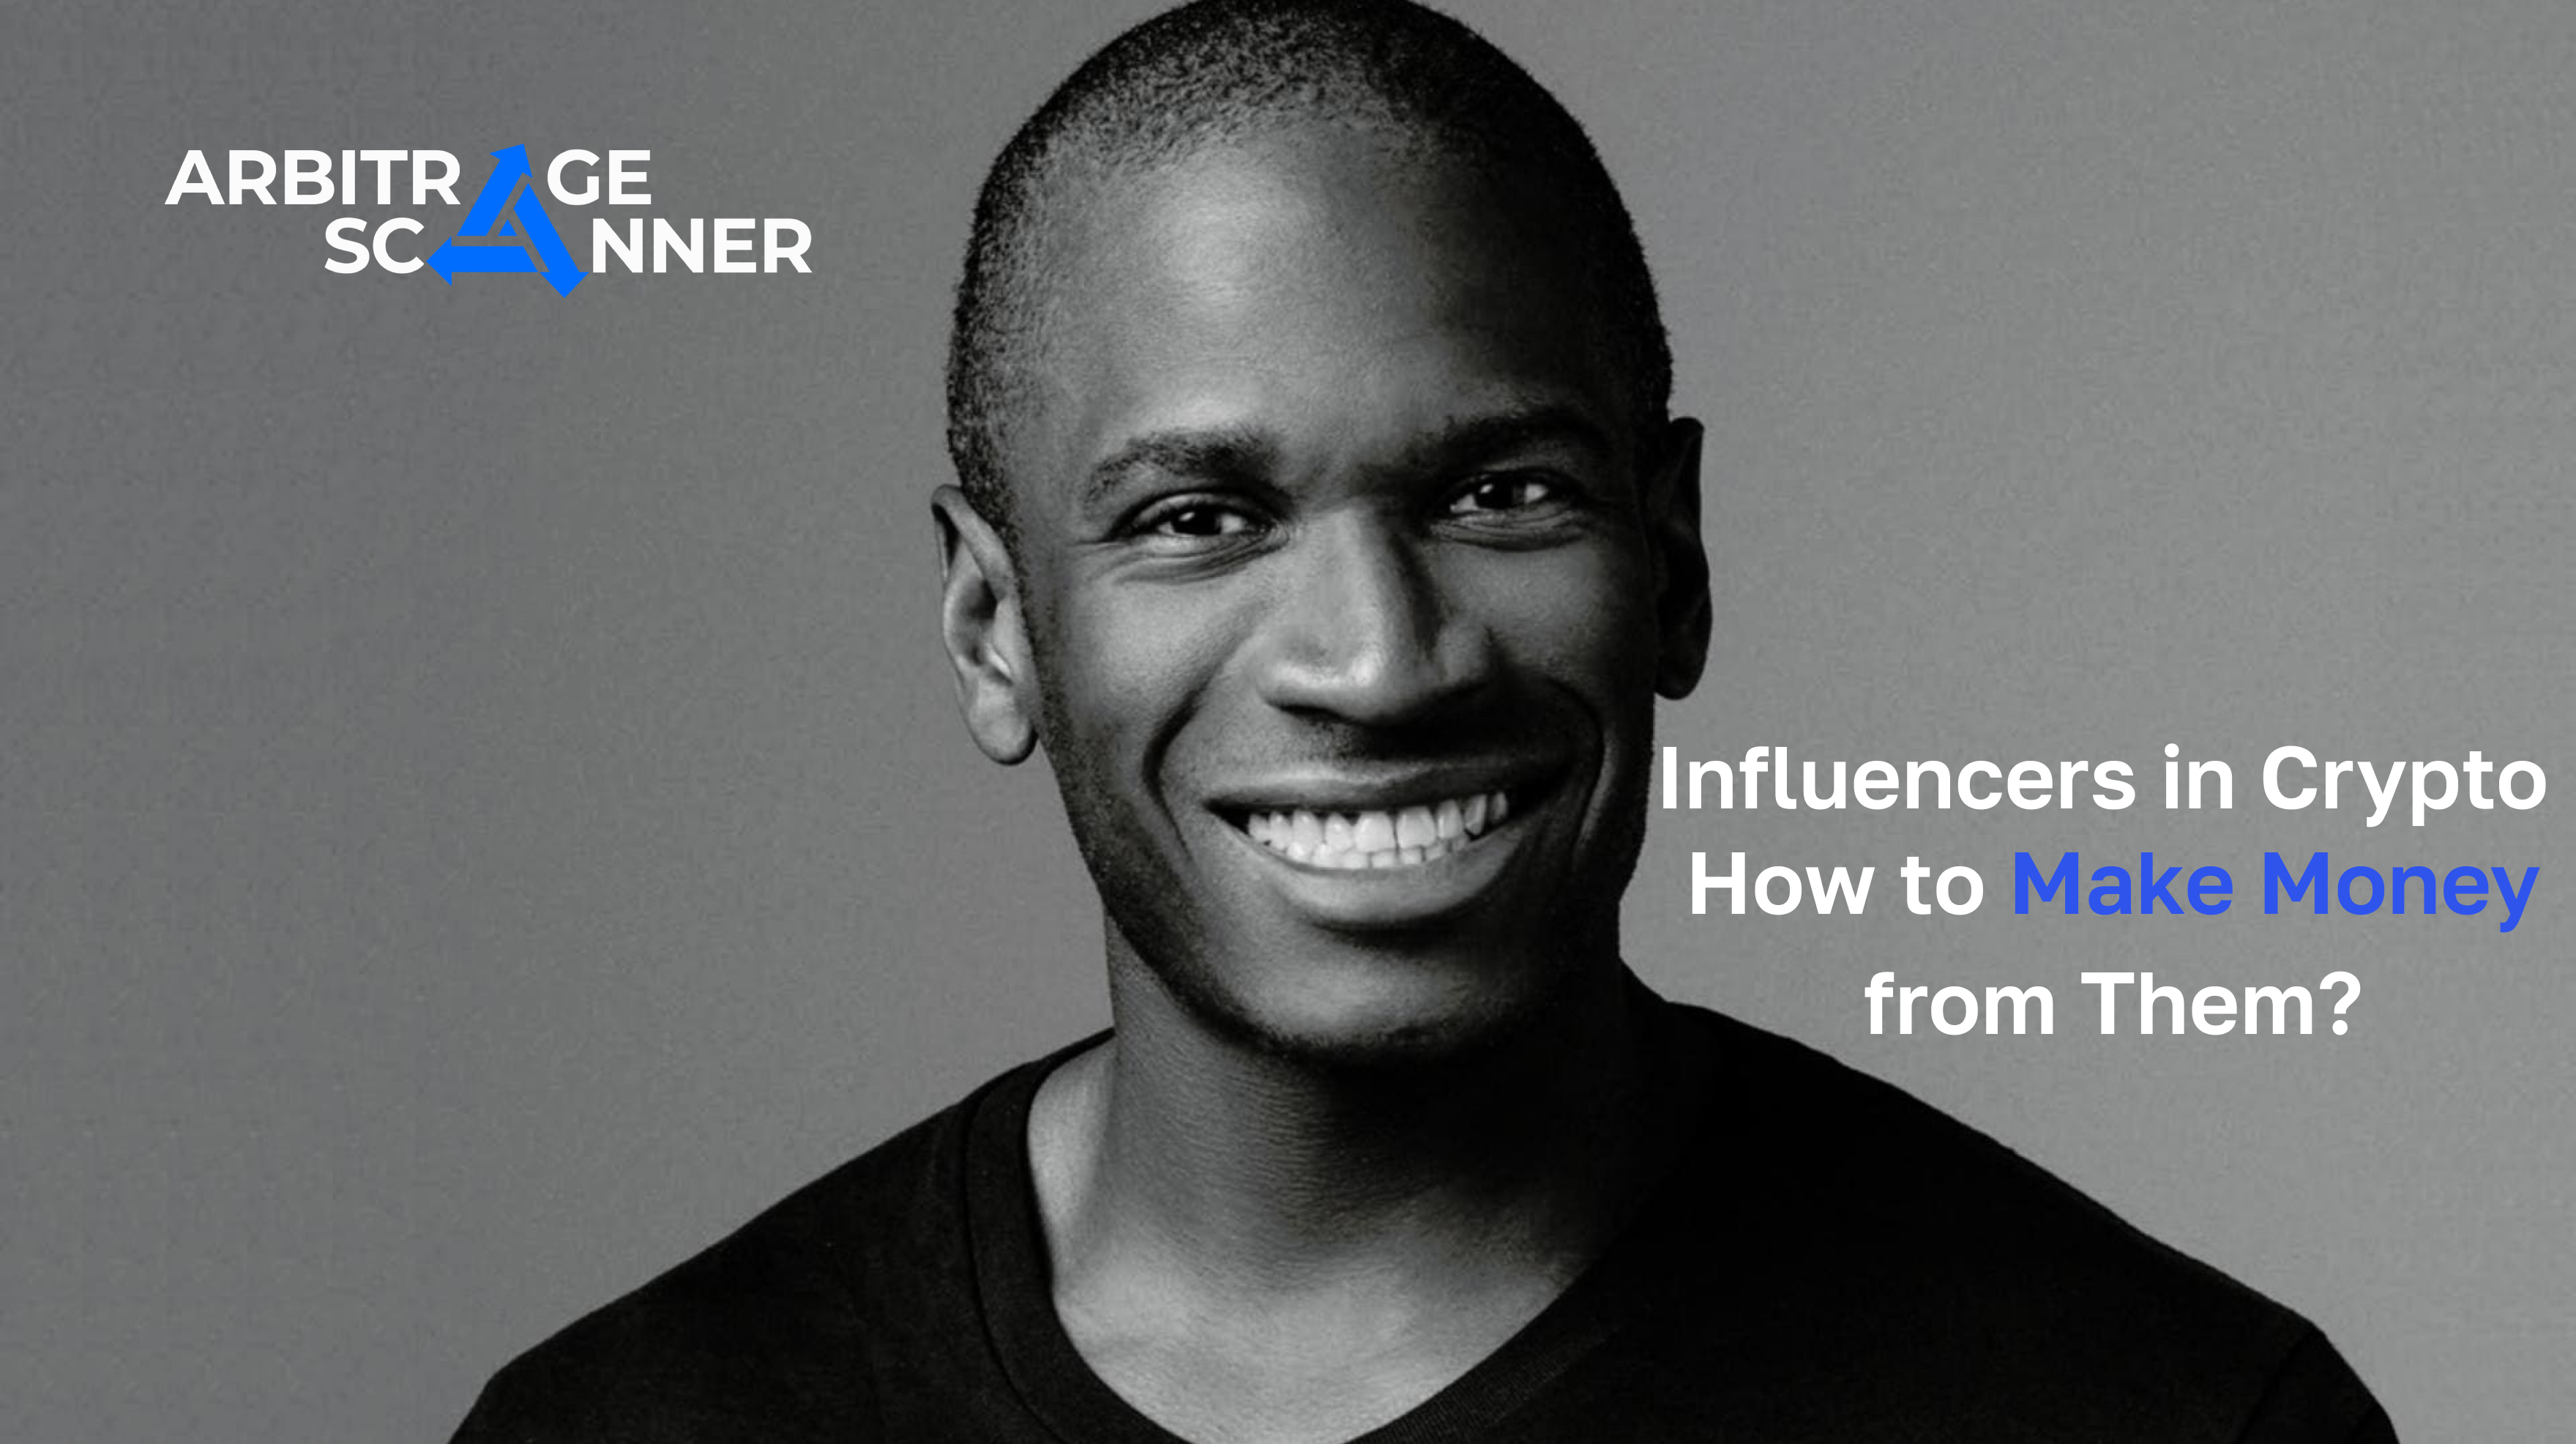 Influencers in Crypto | How to Make Money from Them | Case Study $7500 on Arthur Hayes